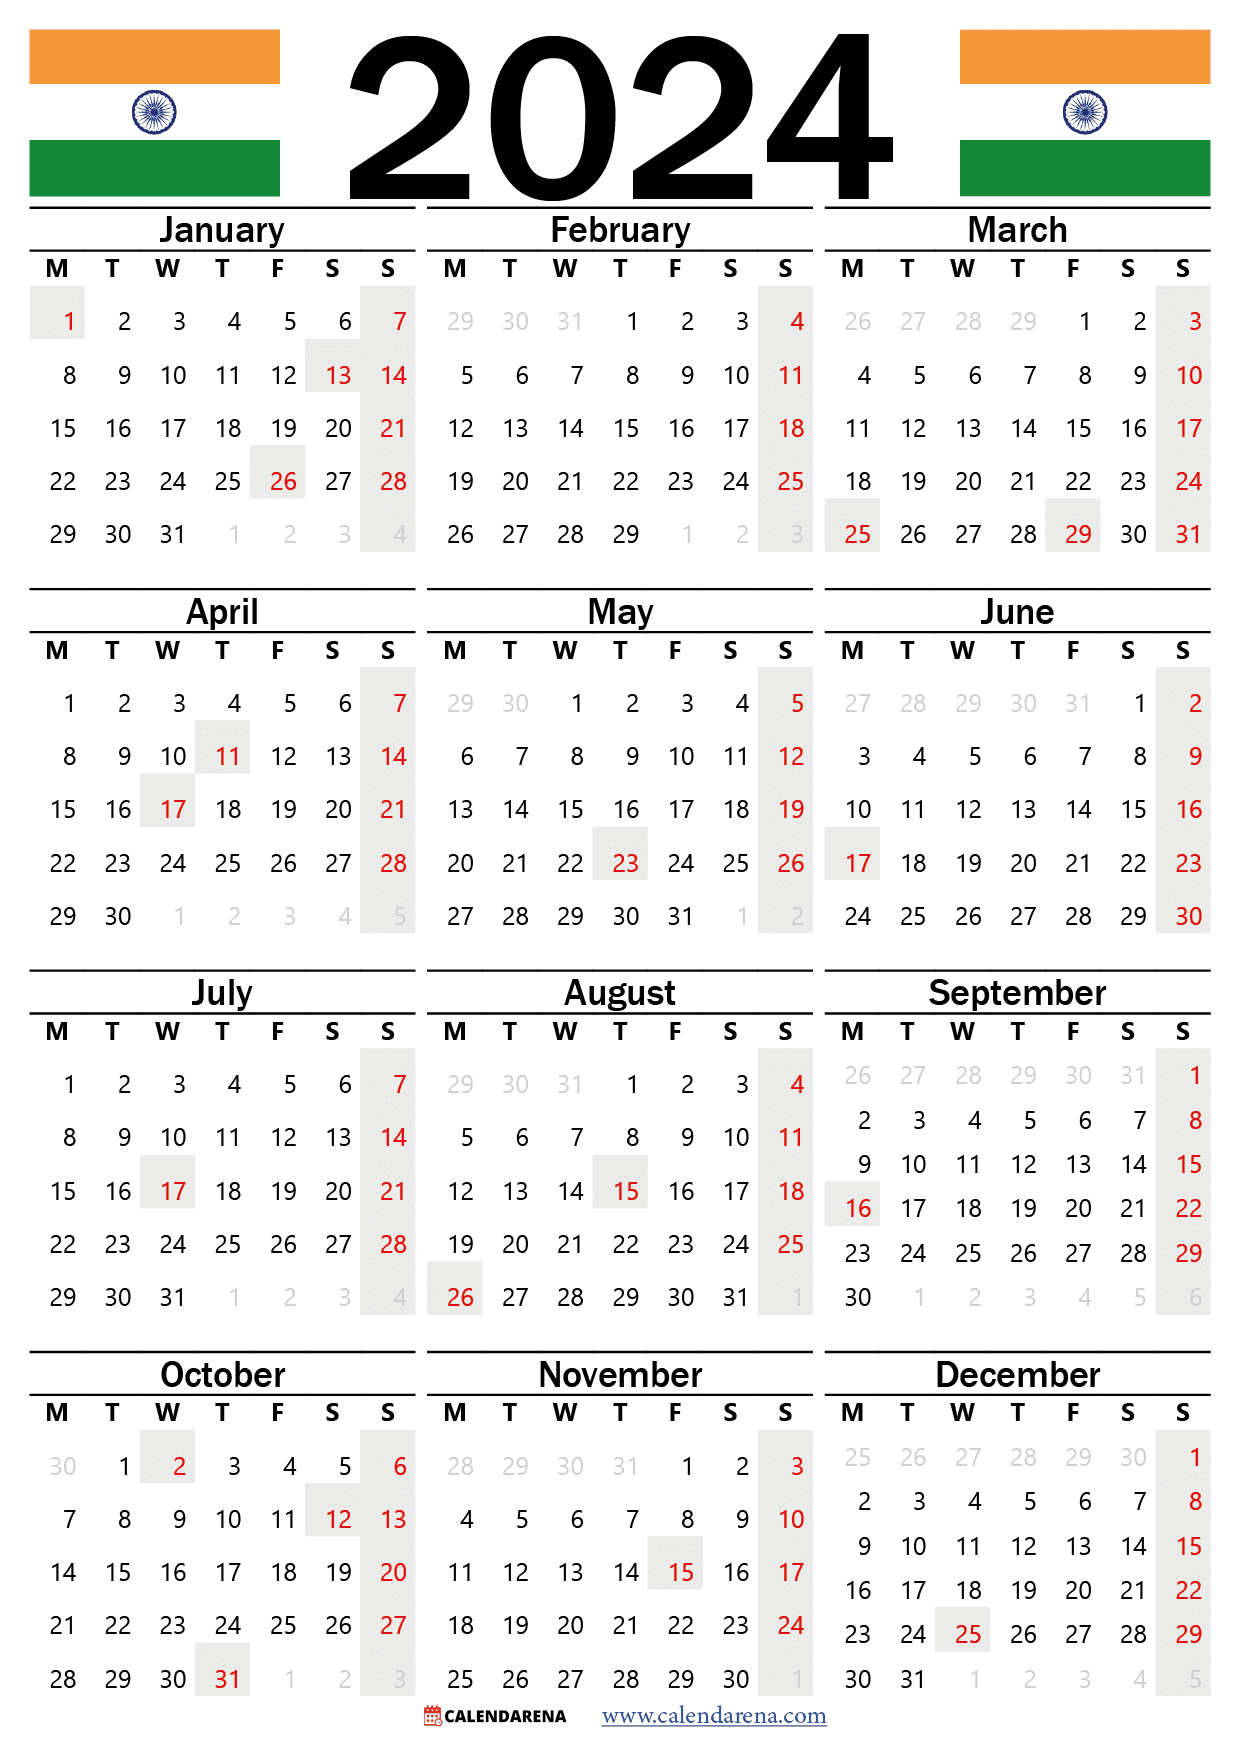 Calendar 2024 India With Holidays And Festivals | Printable Calendar 2024 With Holidays India